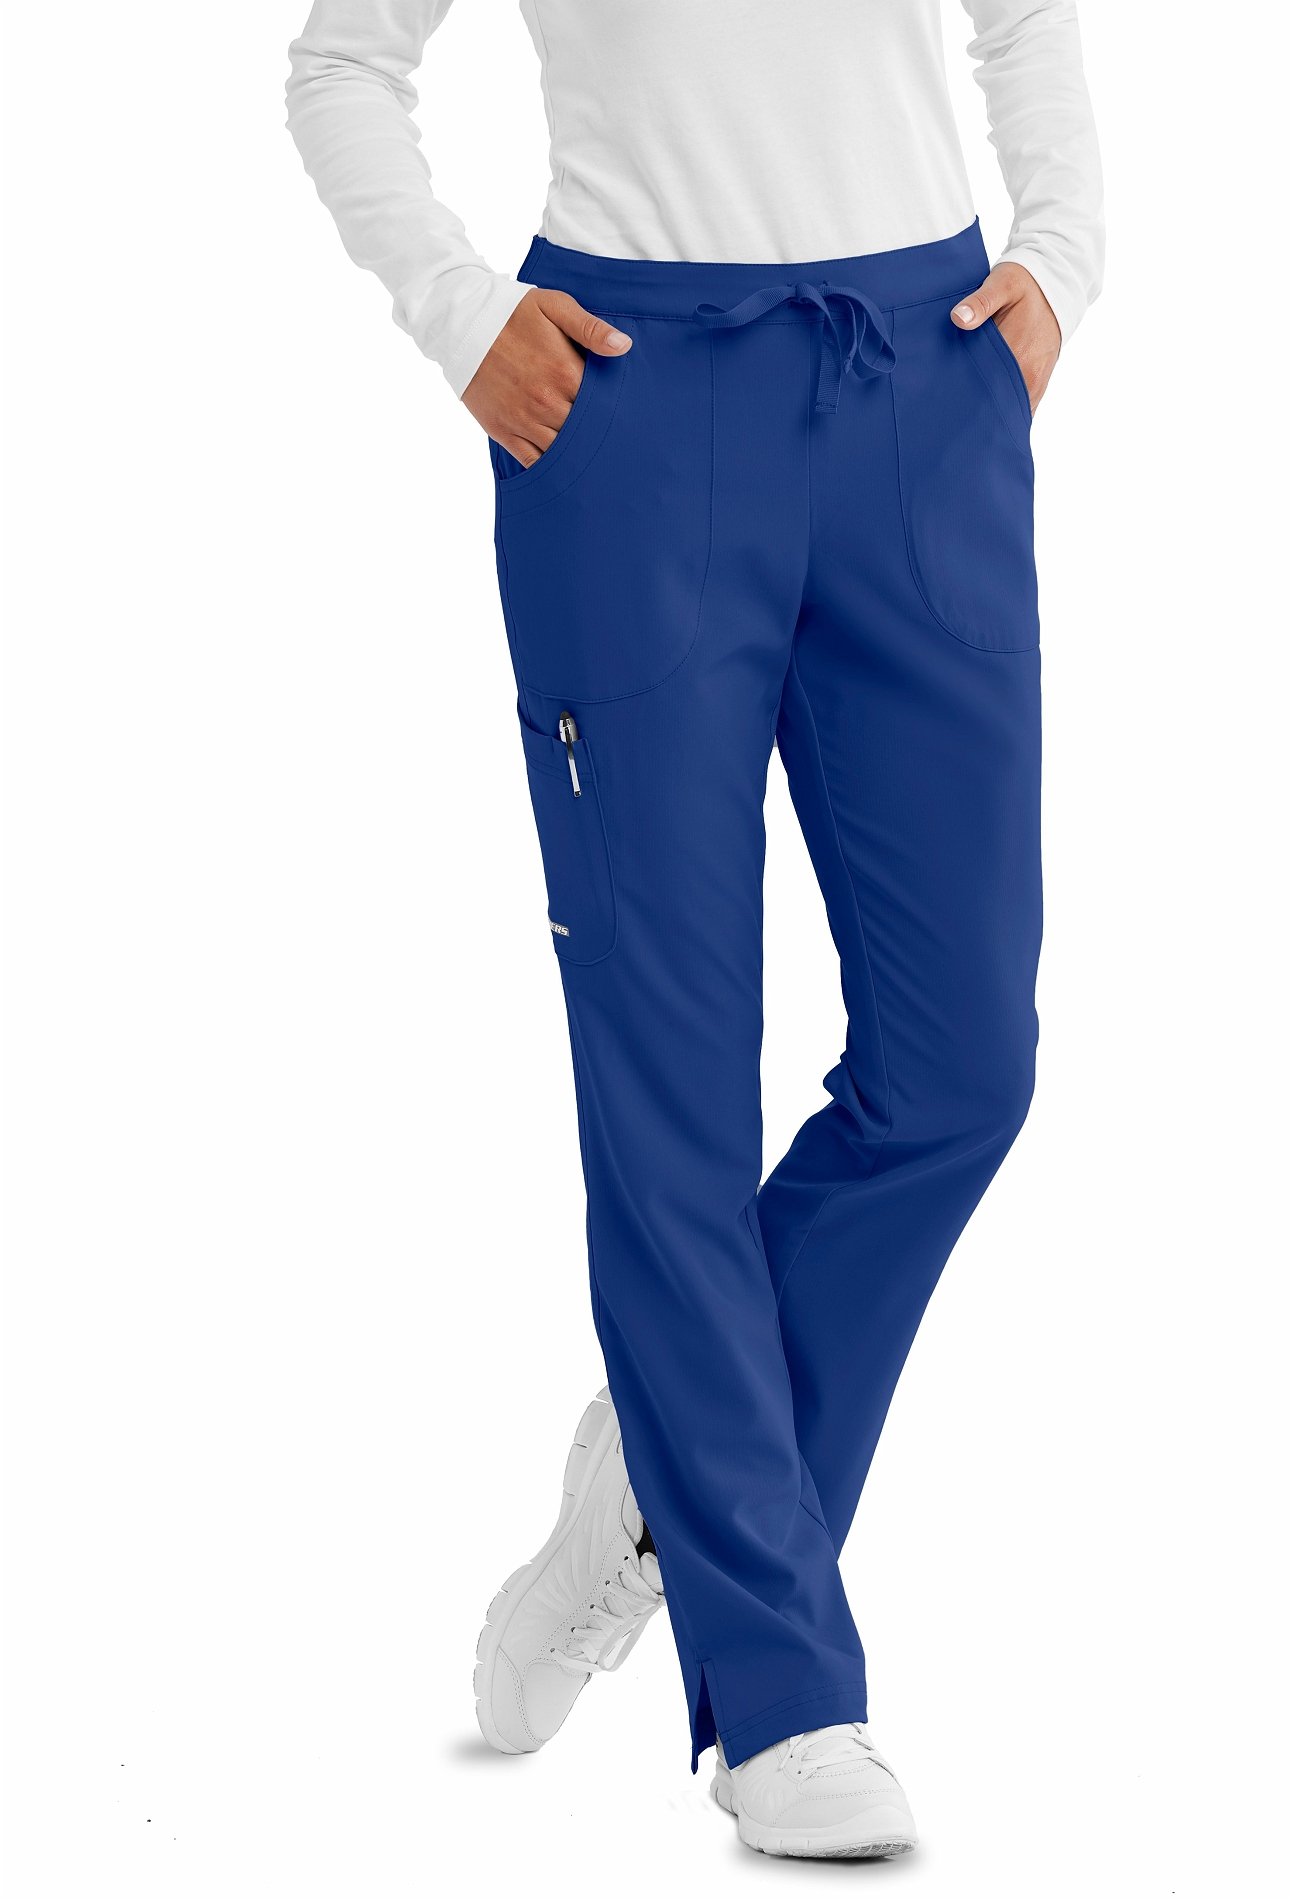 Skechers by Barco Women's Reliance Cargo Drawstring Scrub Pants-SK201 |  Medical Scrubs Collection